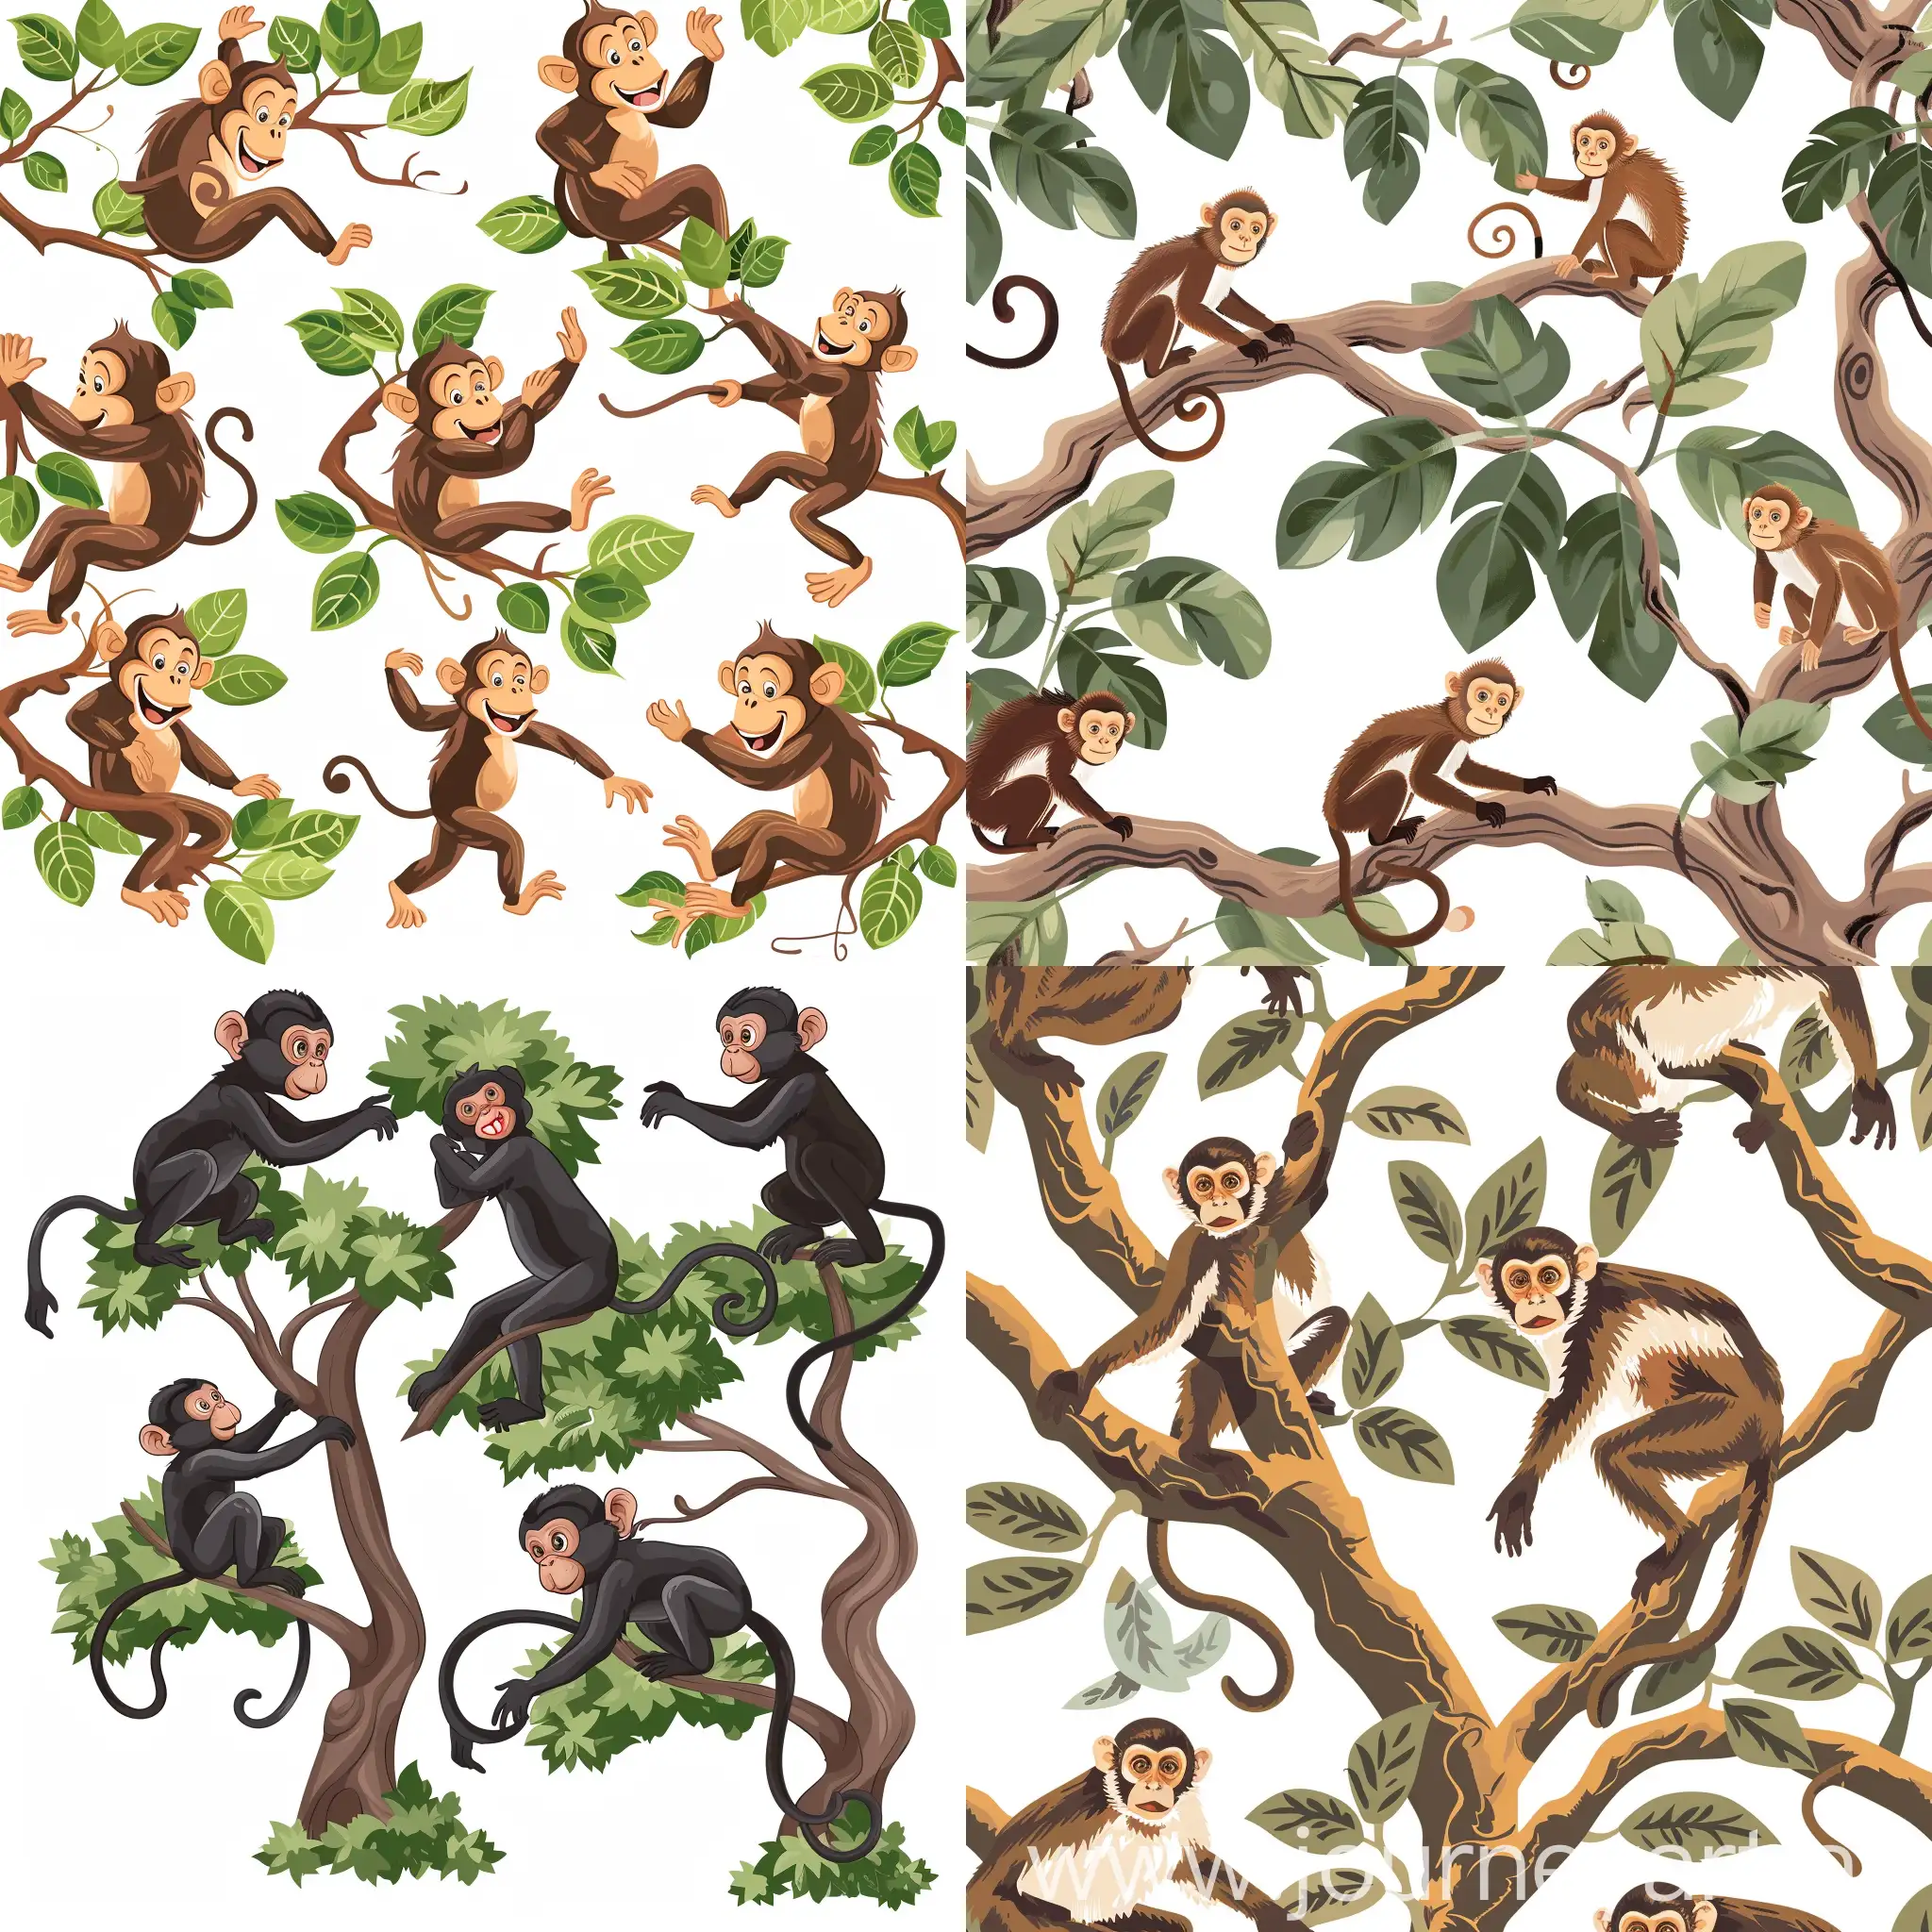 Monkeys-Playing-and-Moving-Among-Trees